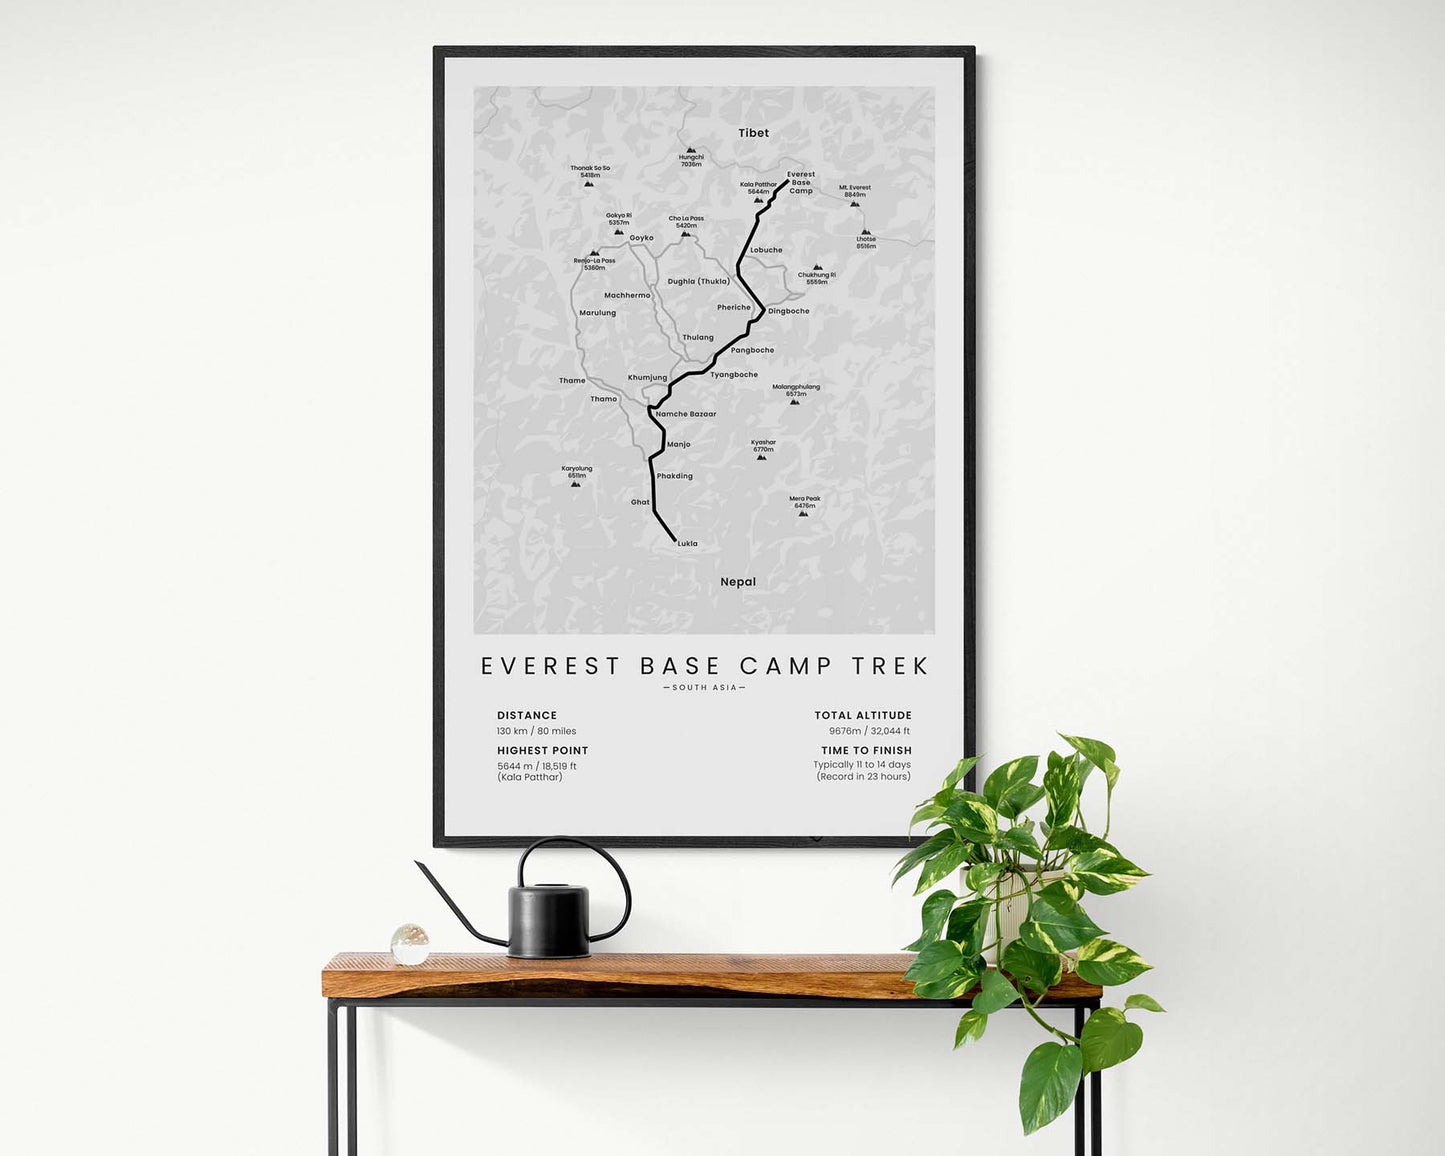 Everest Base Camp Trek minimalist map poster with white background in living room